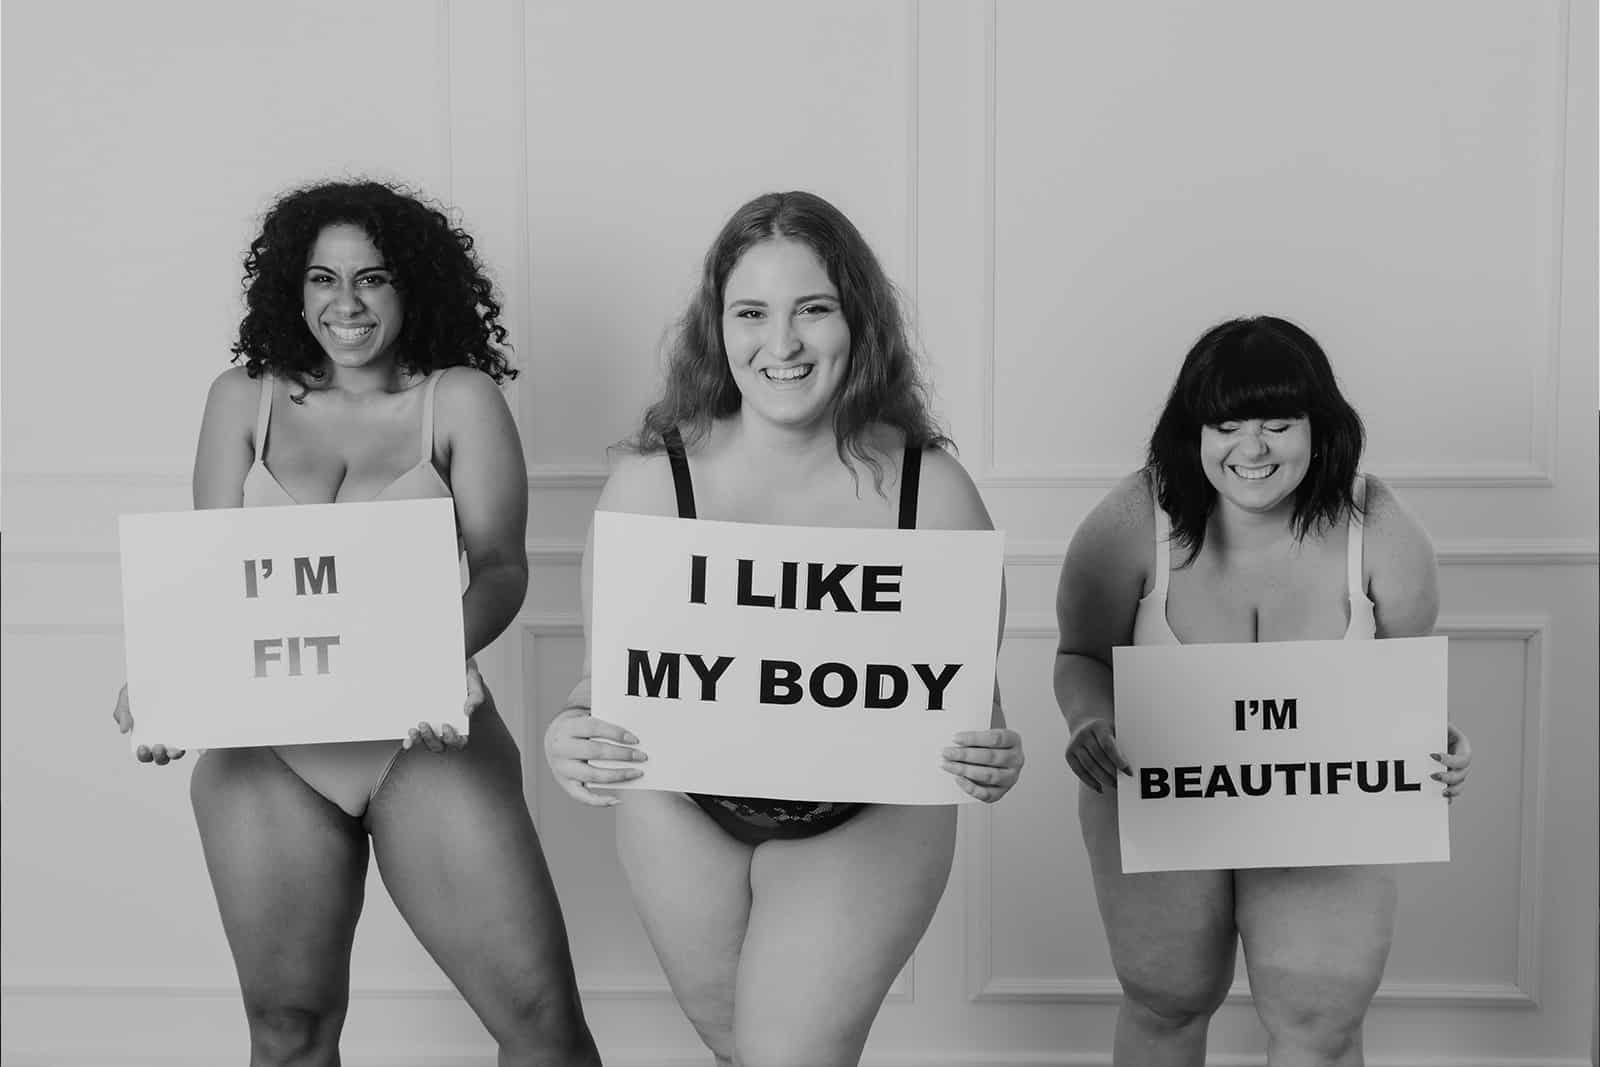 Every body is beautiful